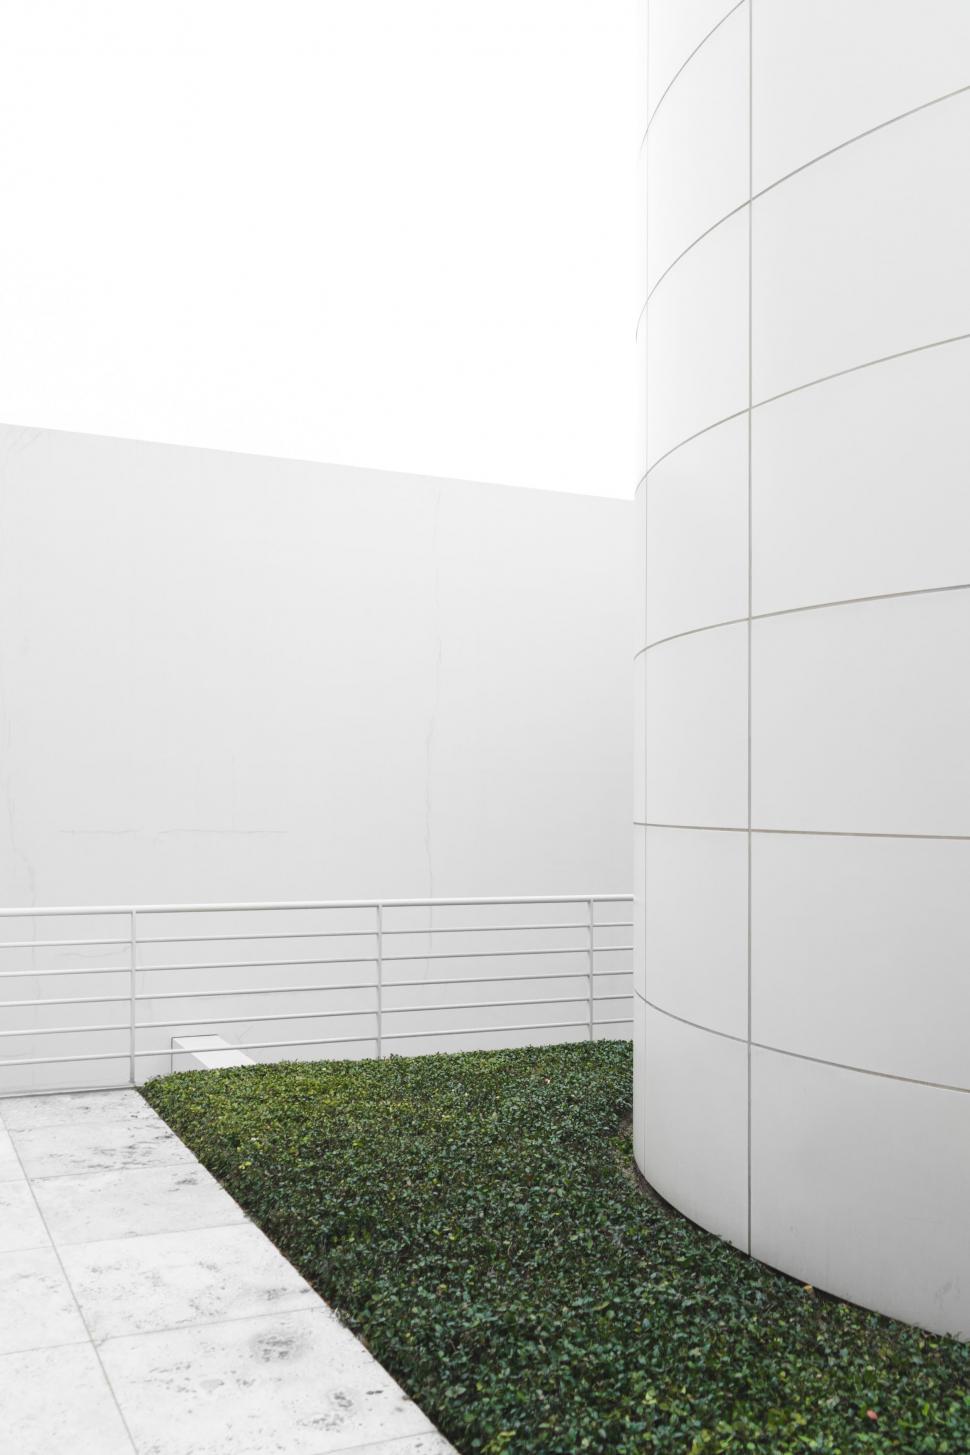 Free Image of White Building With Green Carpet 